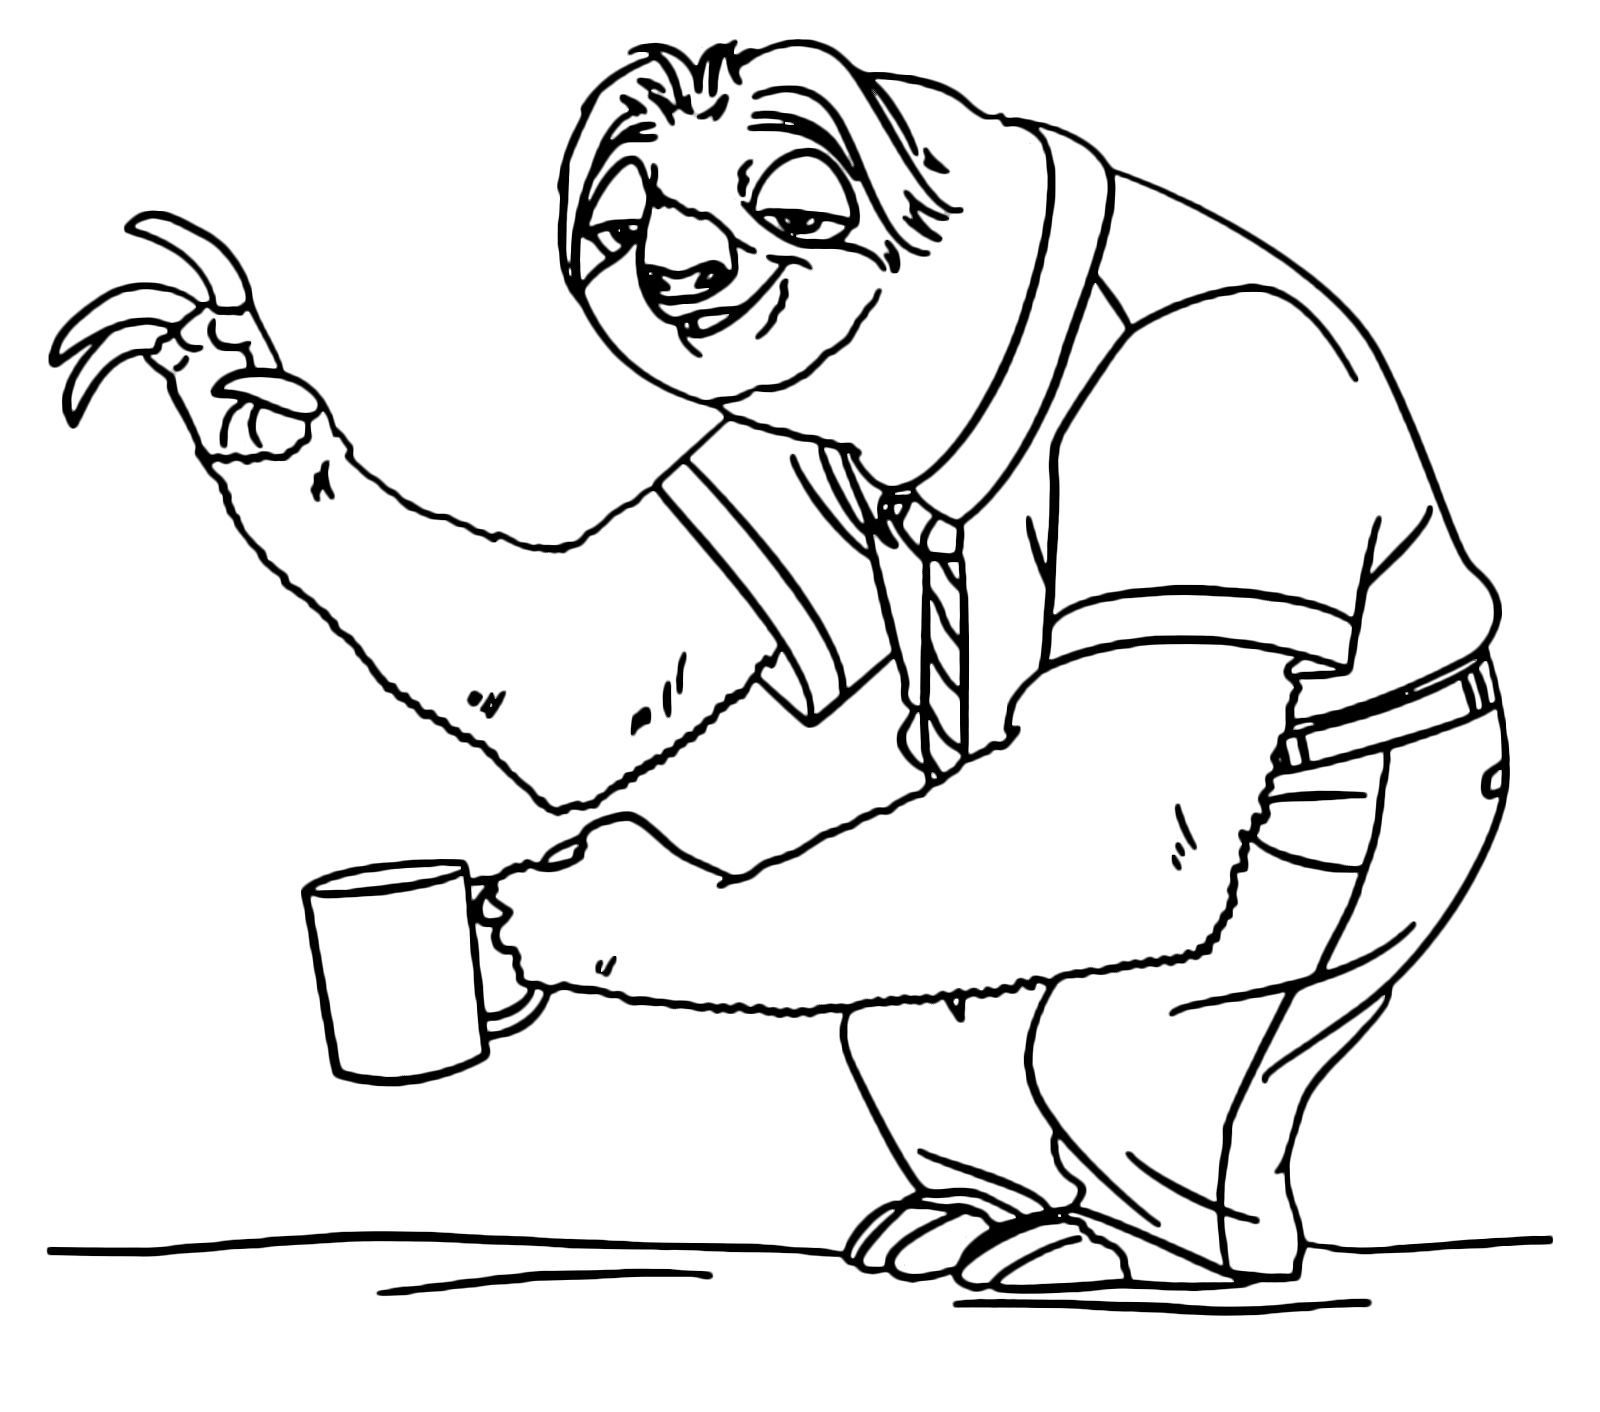 Flash Slothmore greets with cup in hand Coloring Pages